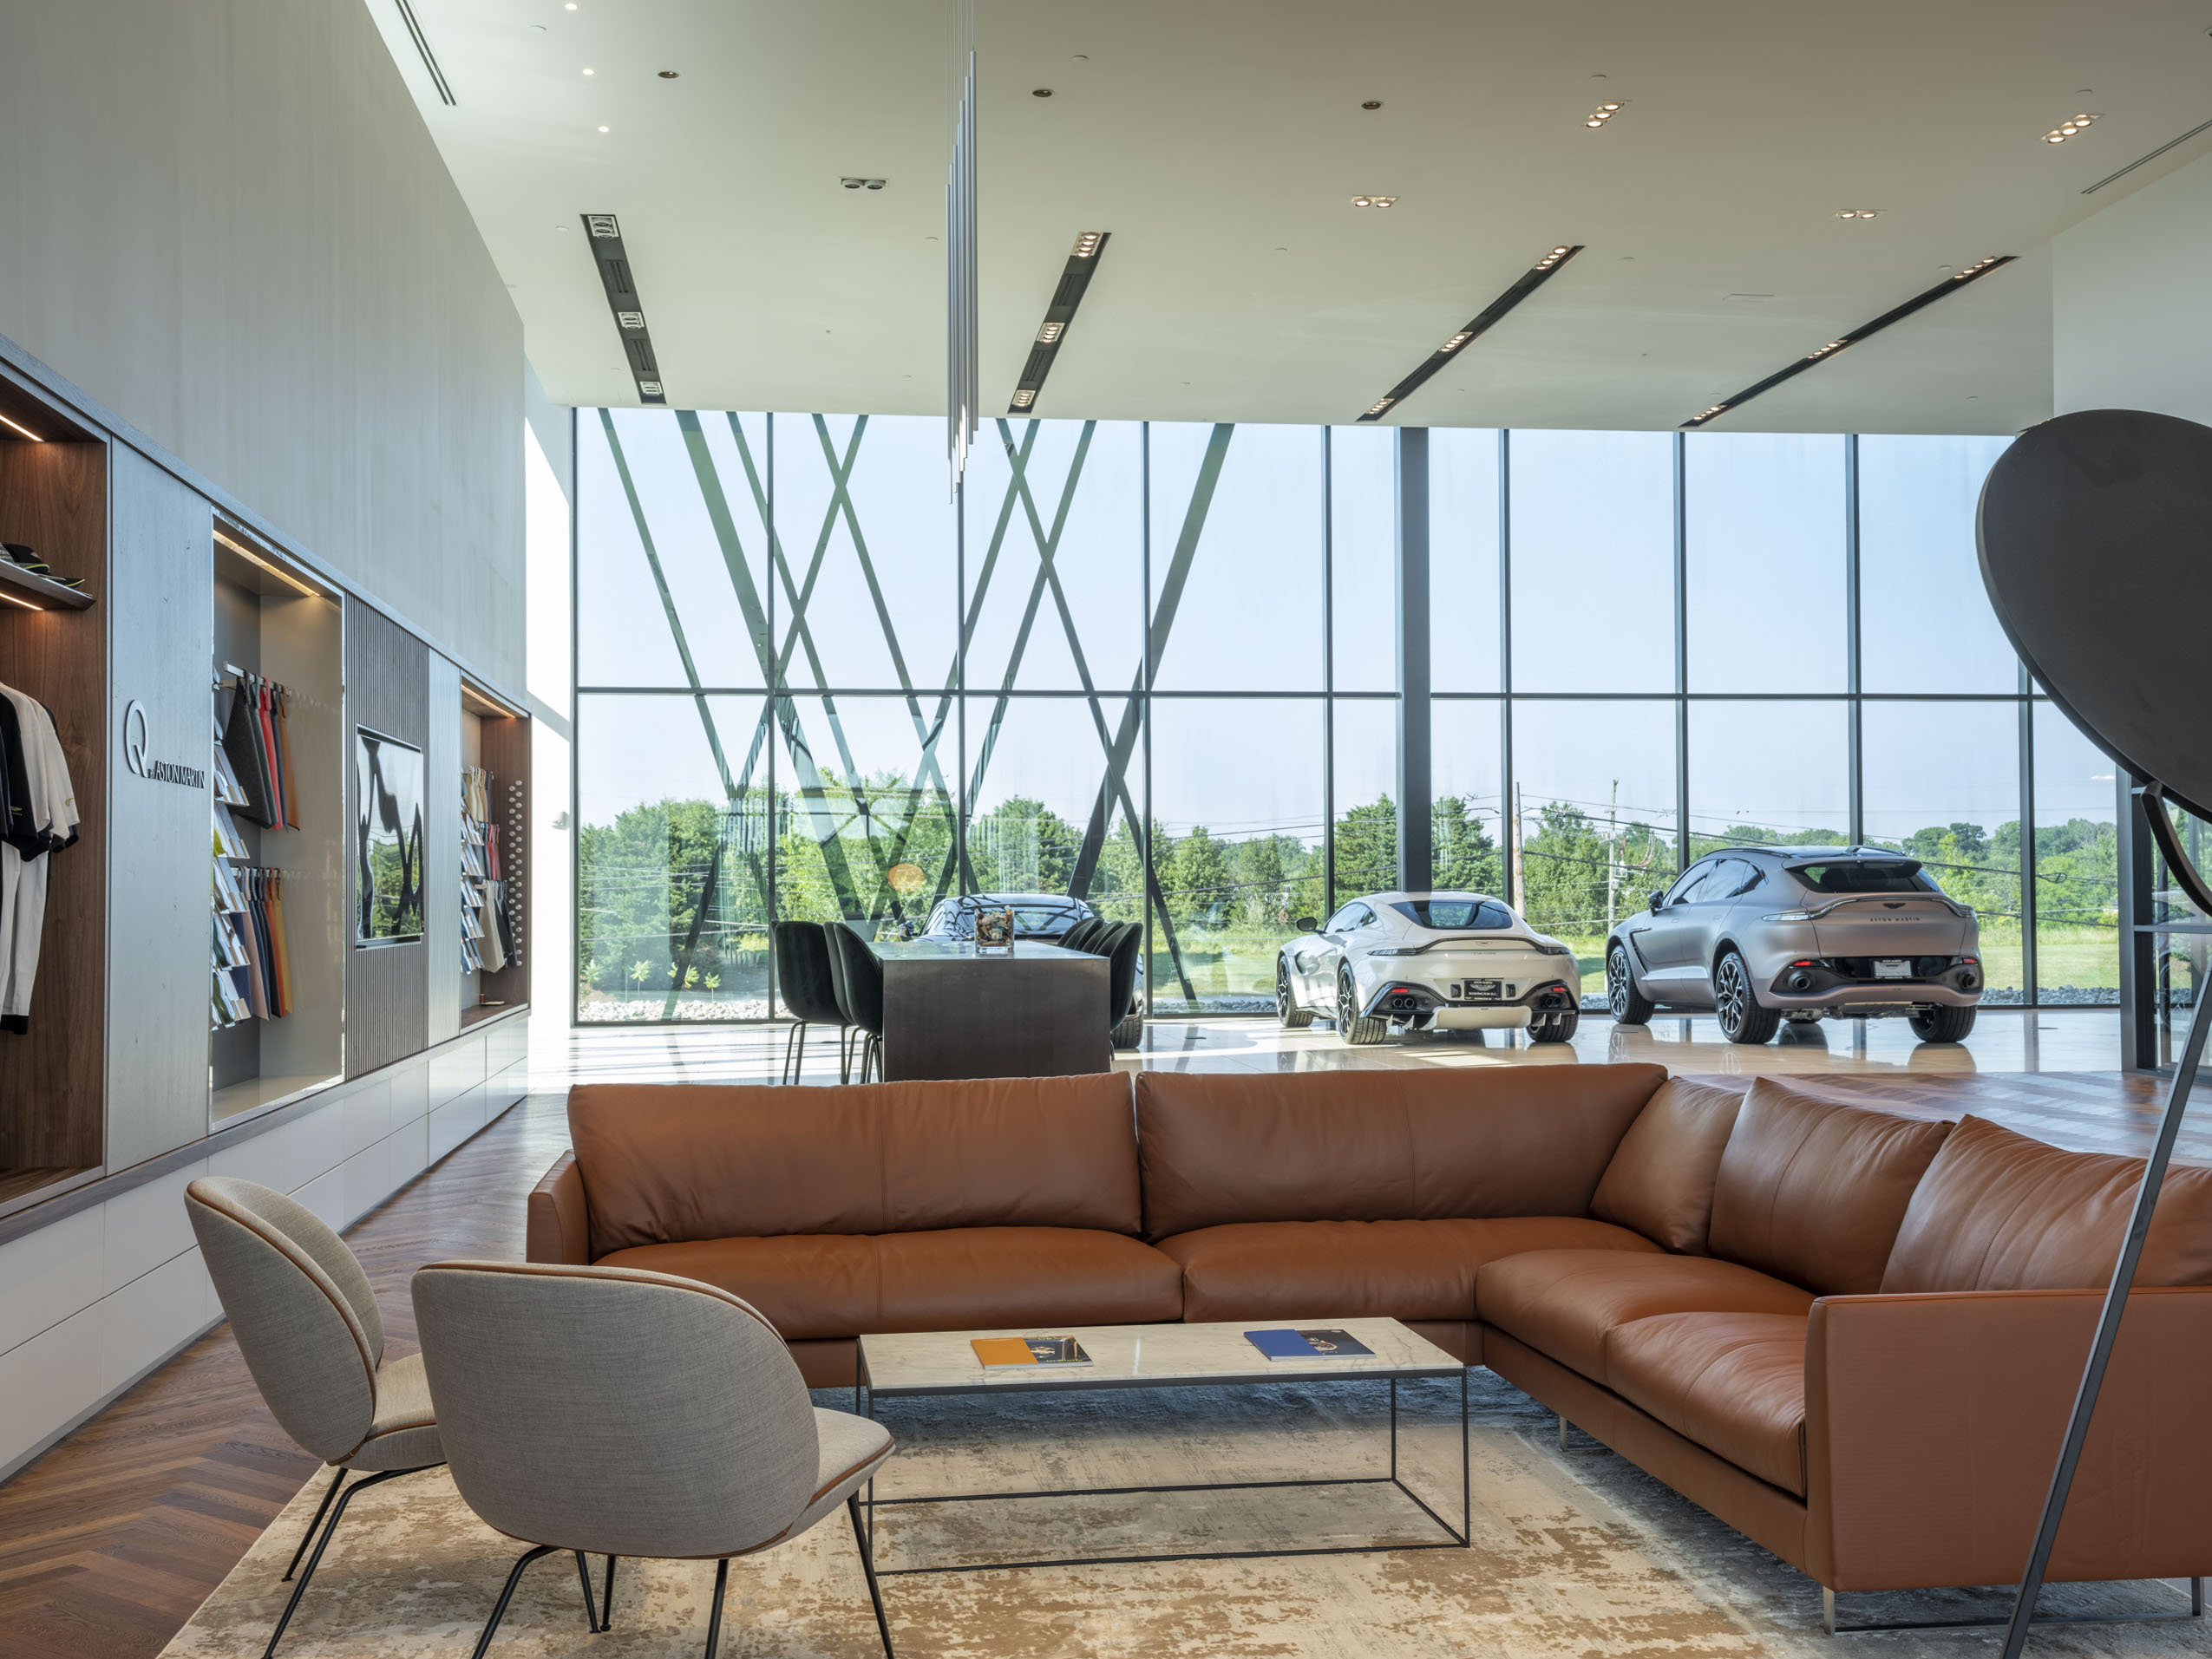 Leather couches in the Exclusive Automotive Aston Martin/Bentley of Loudon dealership